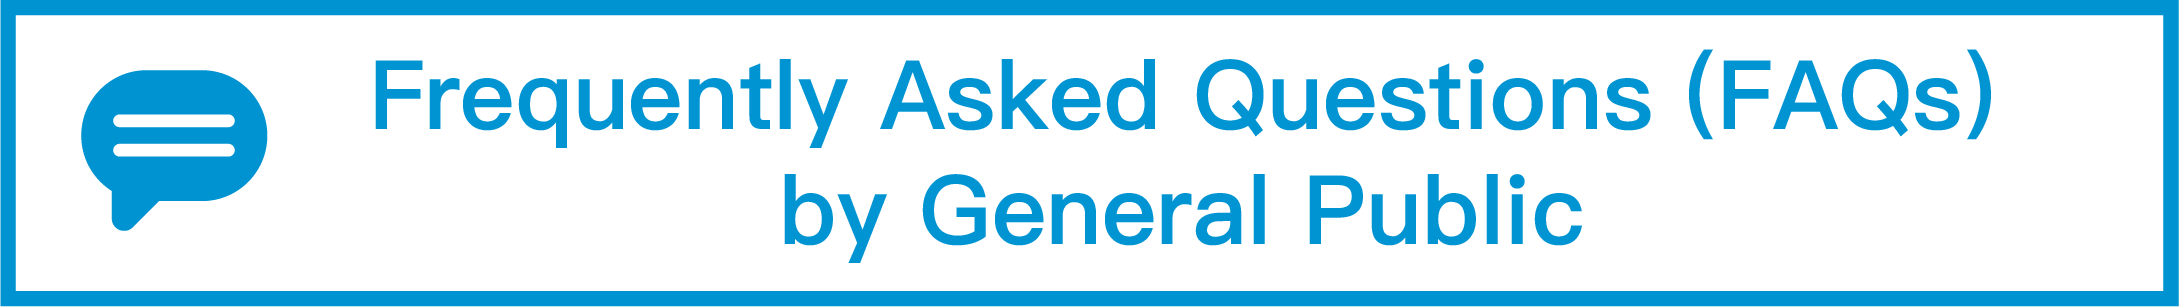 Frequently Asked Questions (FAQs) by General Public